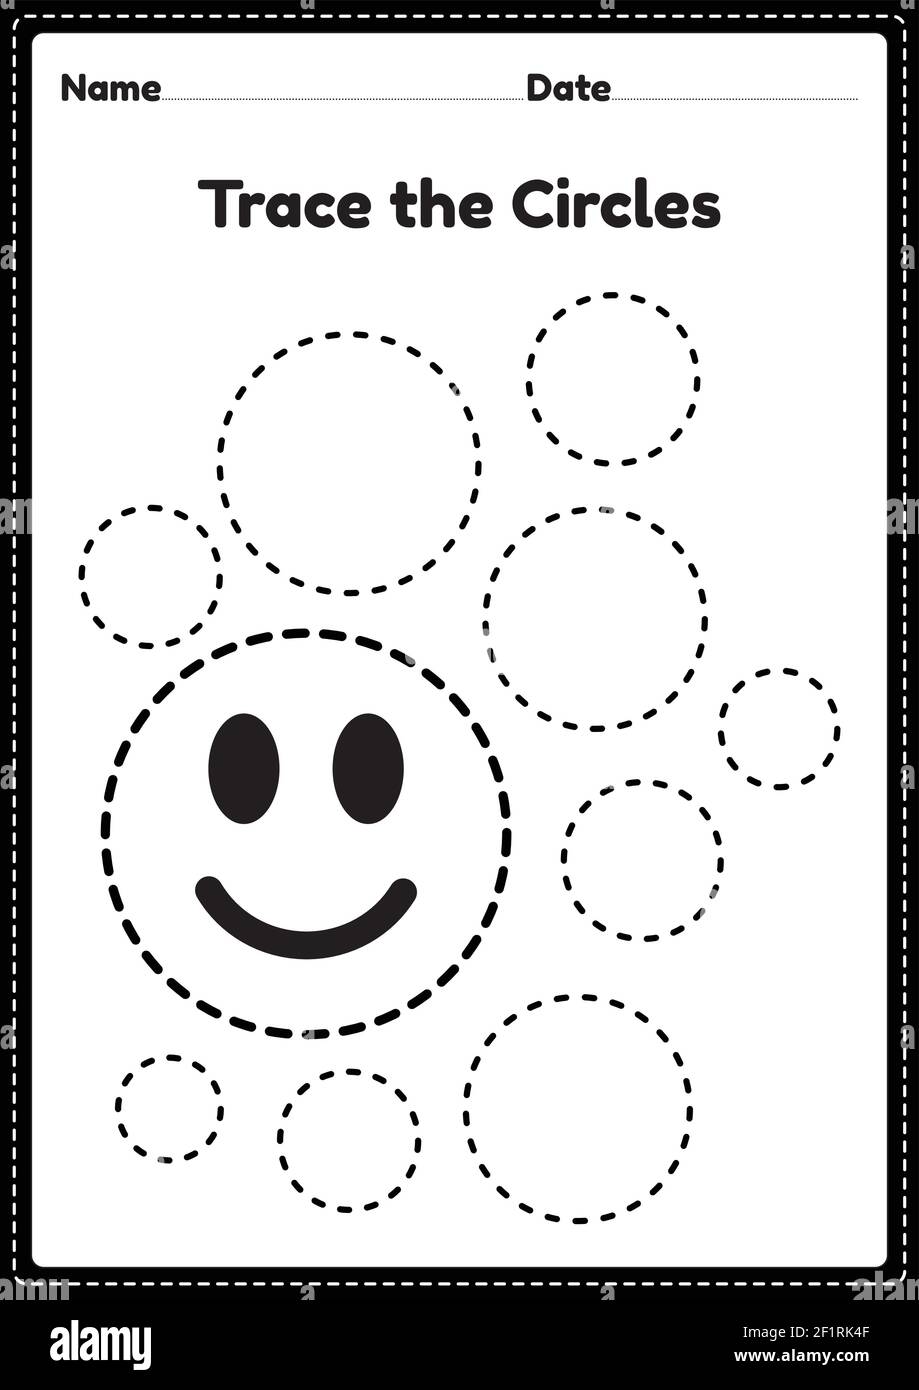 free-all-about-circle-shapes-preschool-worksheets-kindergarten